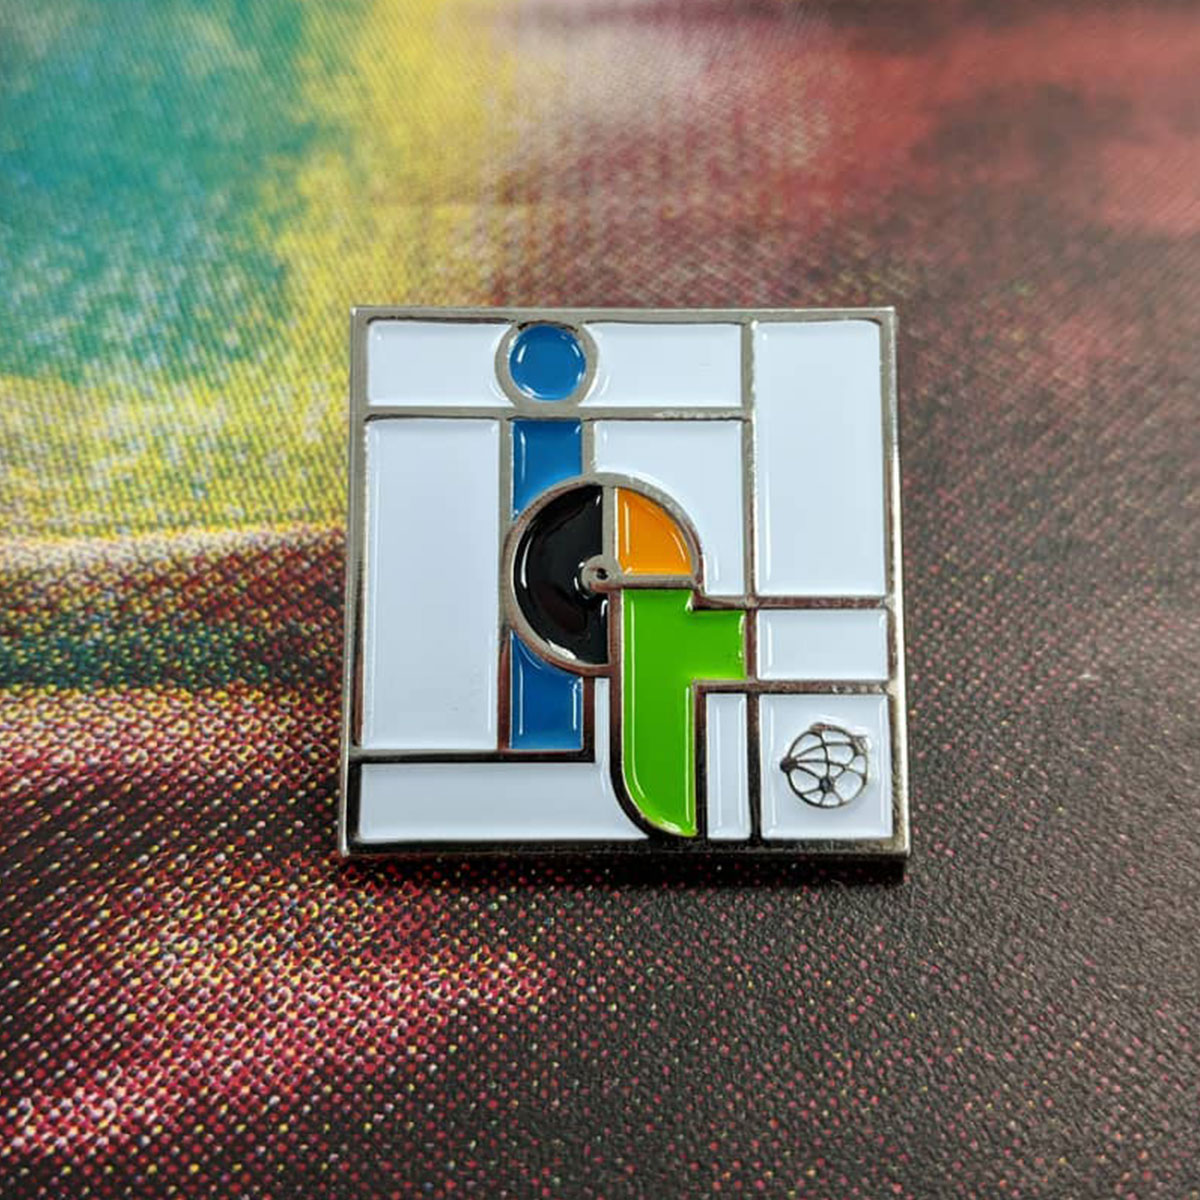 Aeris Internet of Things for Business 3rd Edition Book Campaign – Enamel Pin Design